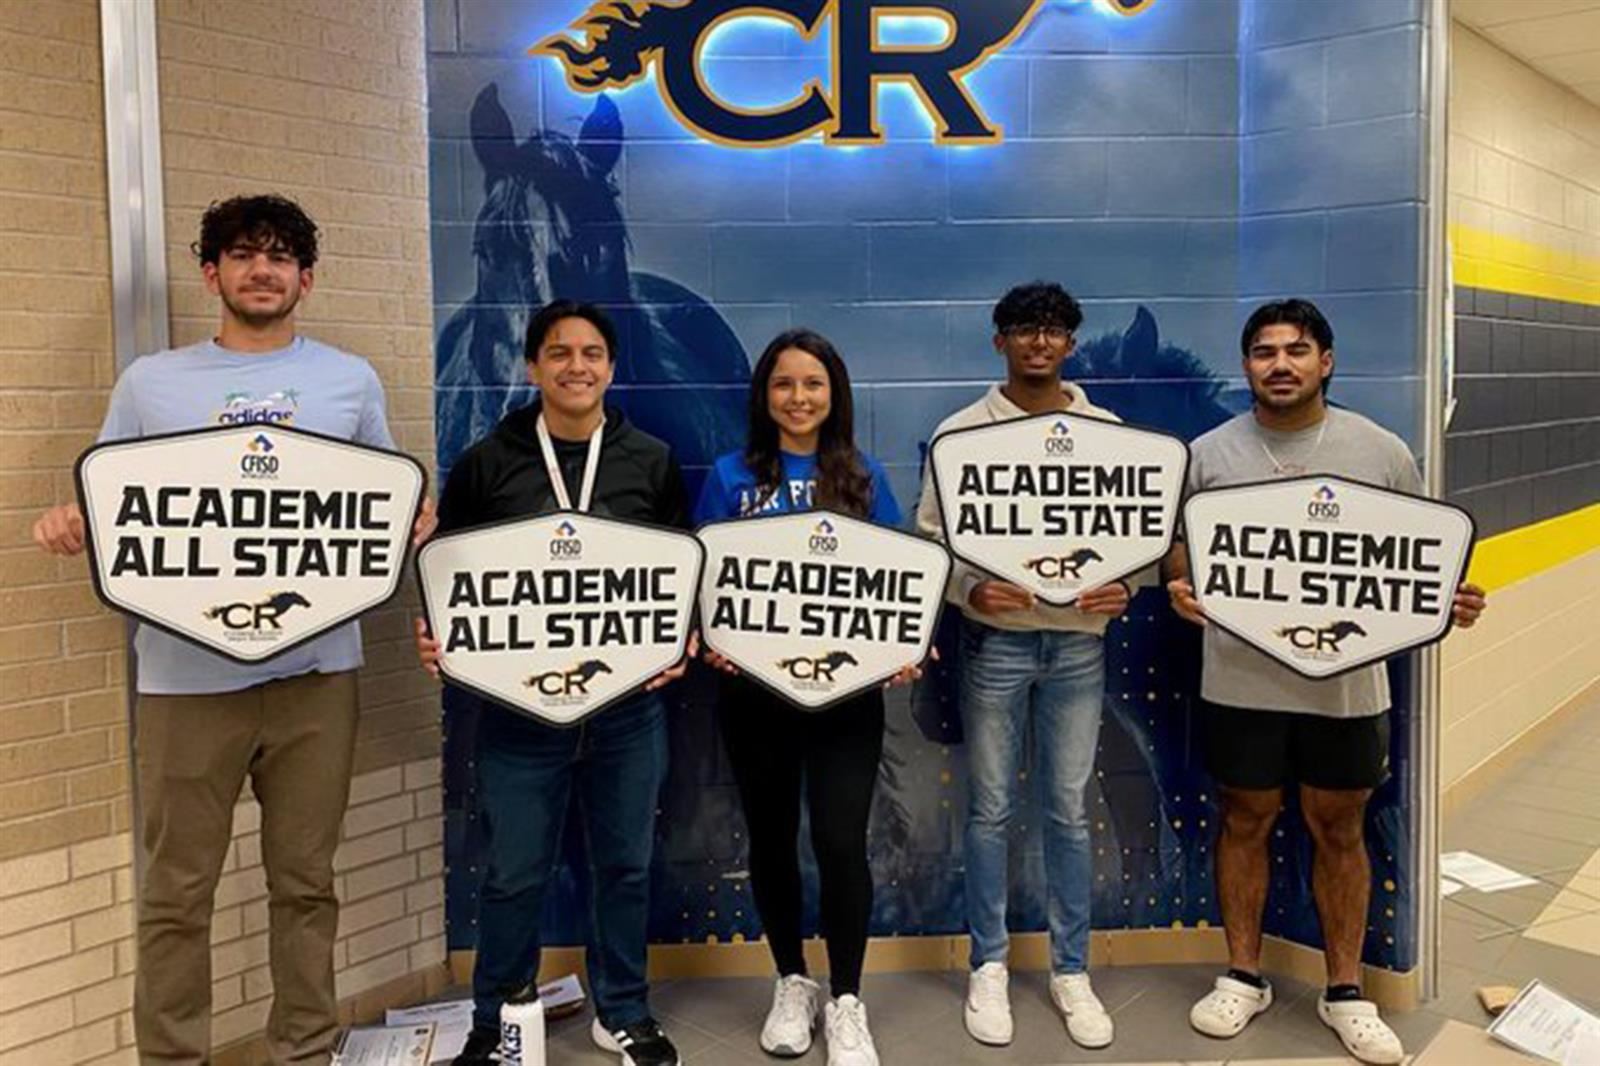 Cypress Ranch senior Kristina Sanchez, center, was among 45 CFISD student-athletes named to the THSCA Academic All-State Team